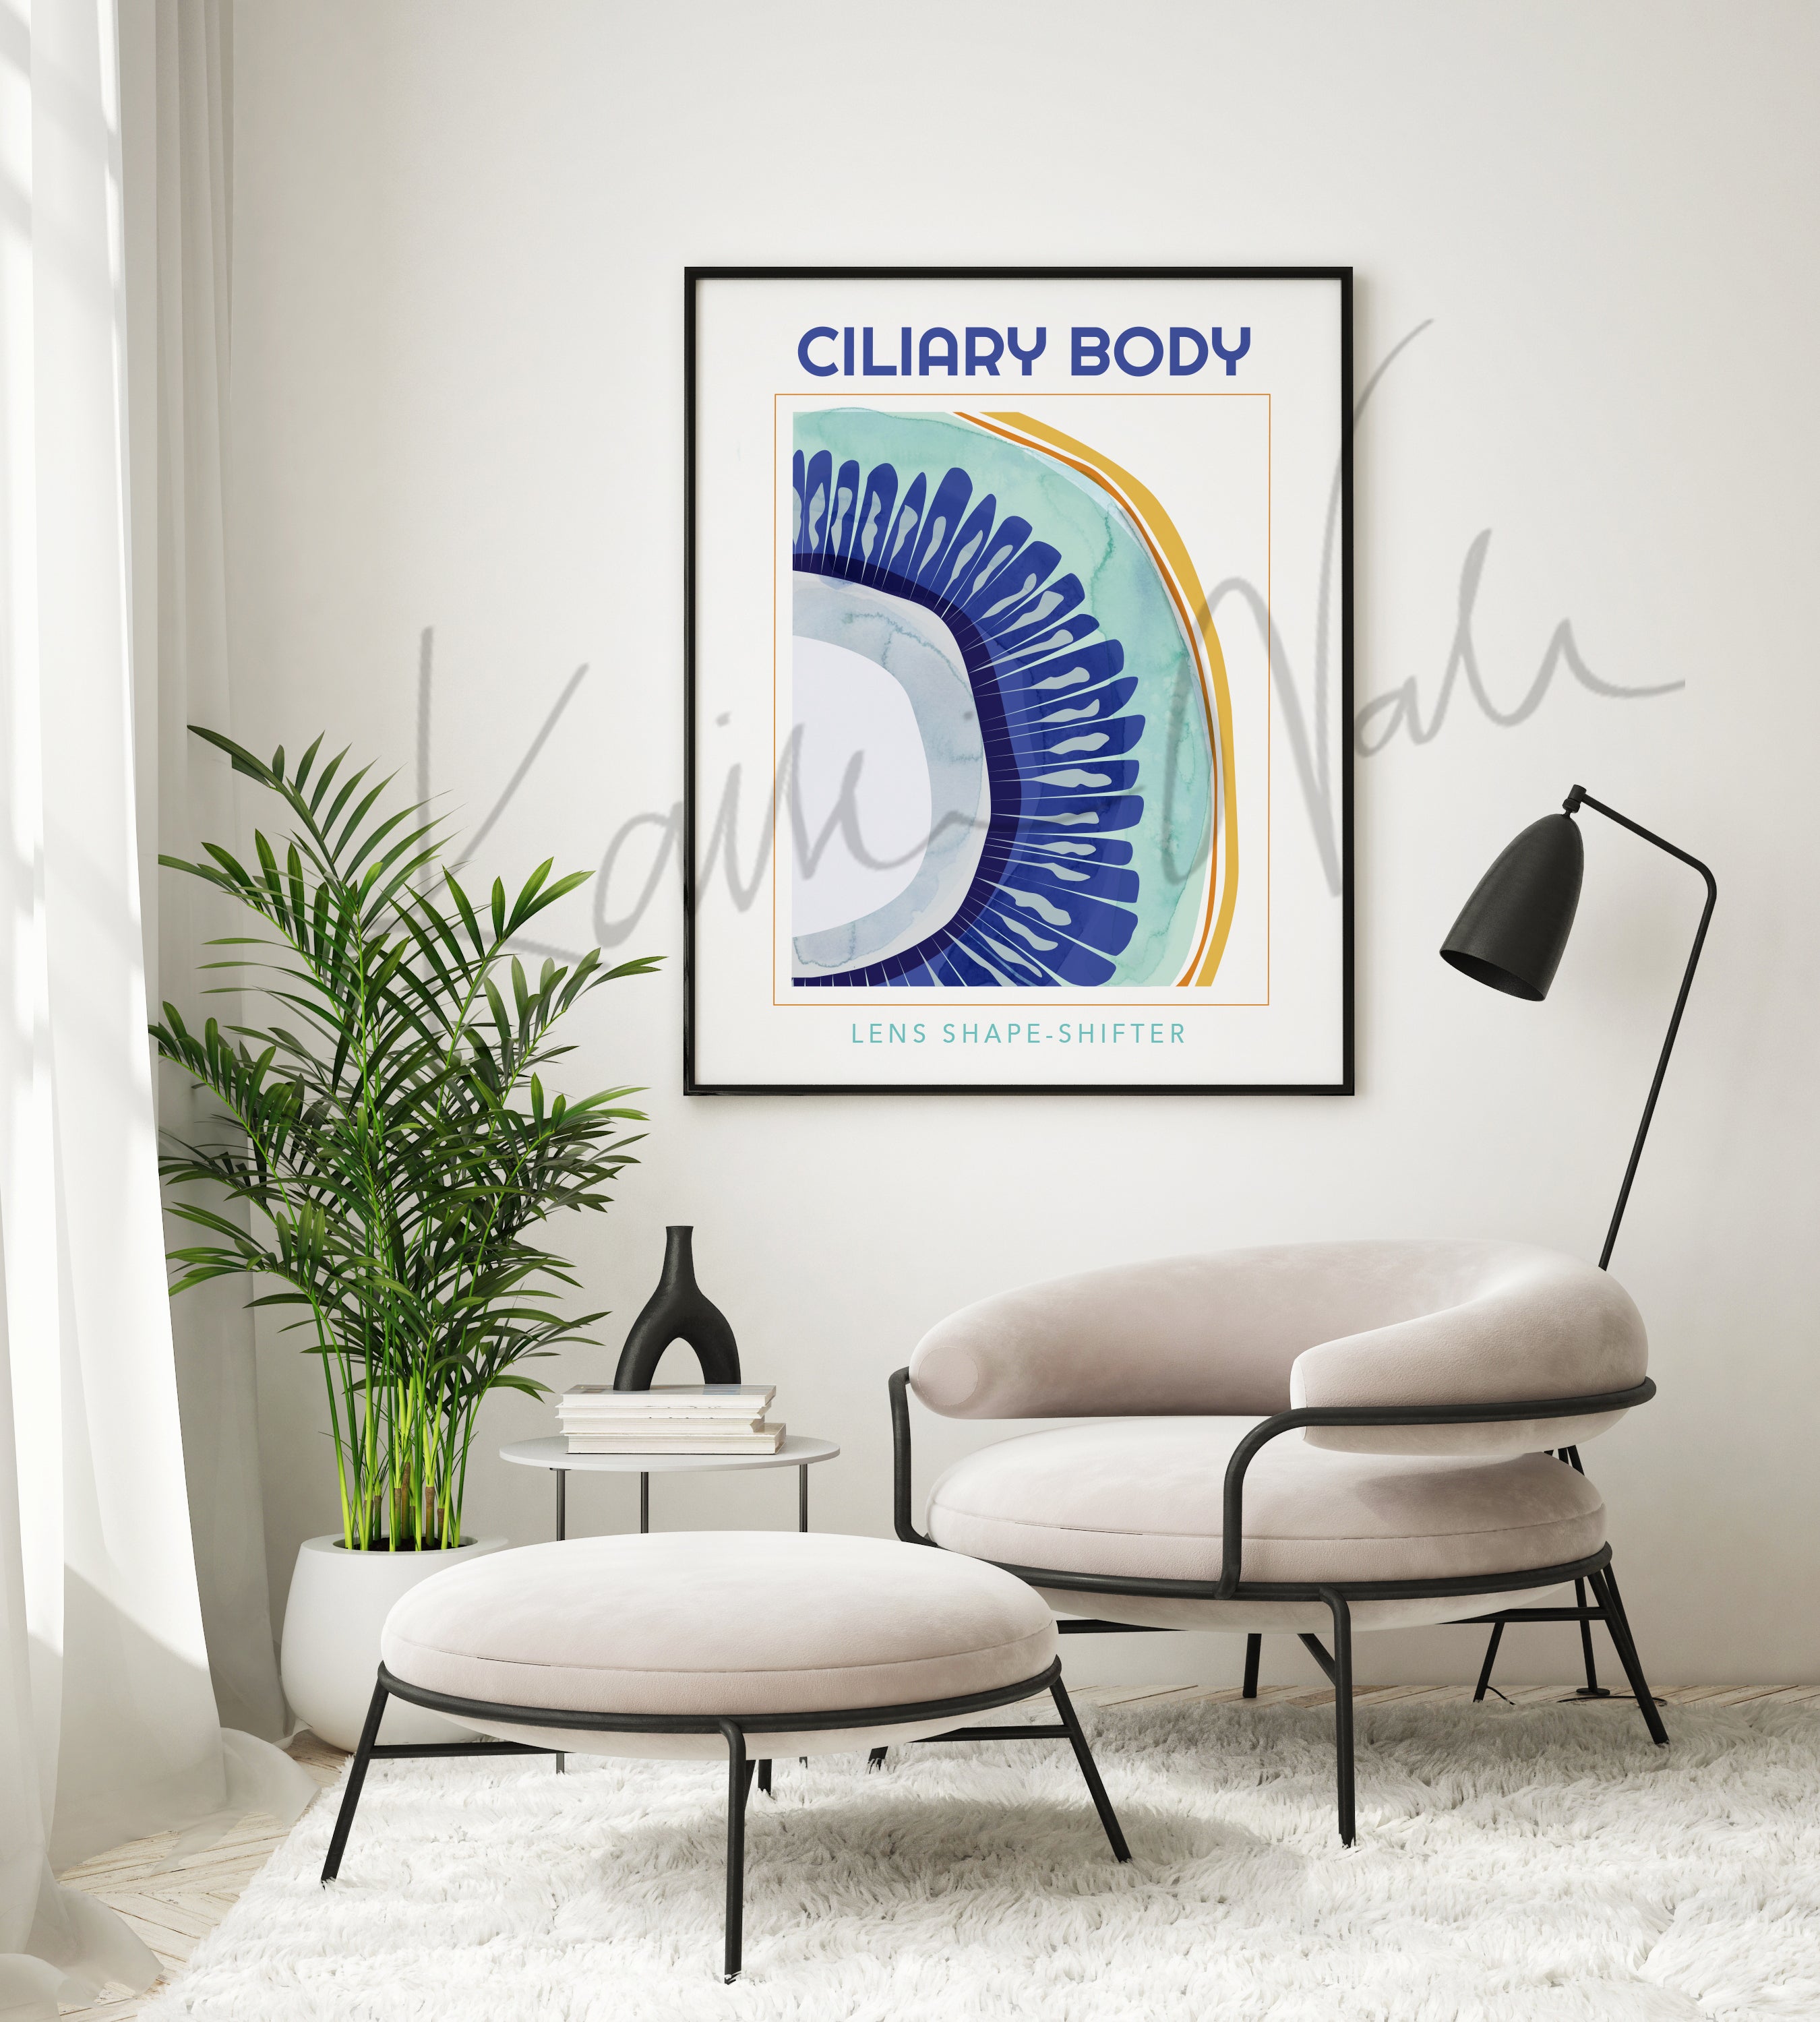 Framed contemporary poster design of the ciliary body in teal, royal blue, orange, and yellow. The painting is hanging over beige chair and footstool, plant, and black floor lamp.